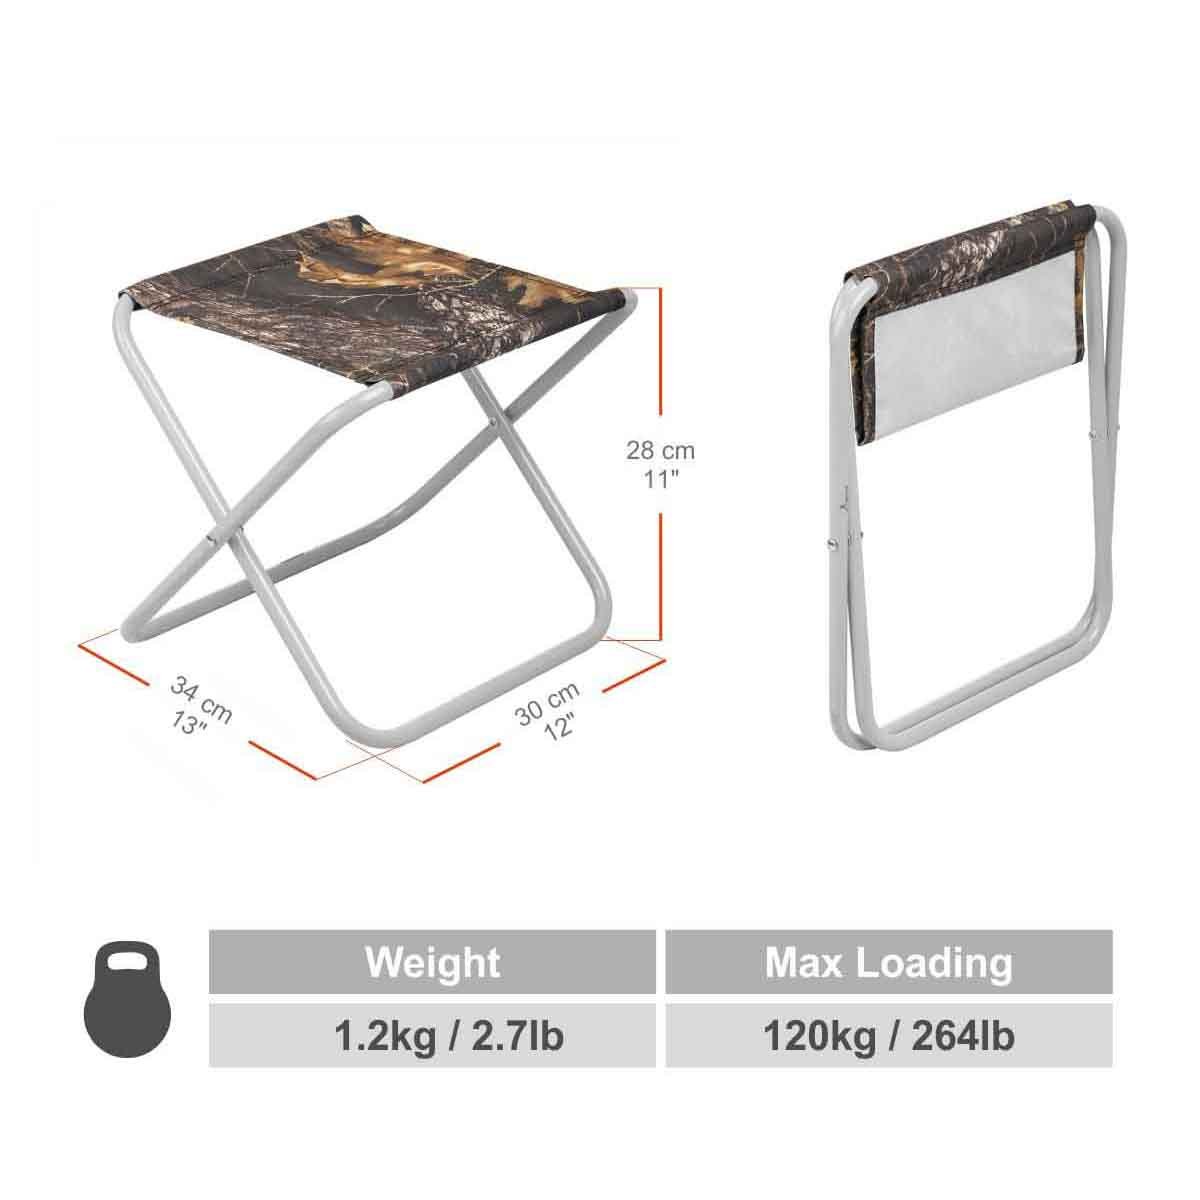 Compact Folding Lightweight Portable Fishing Stool, Set of Four